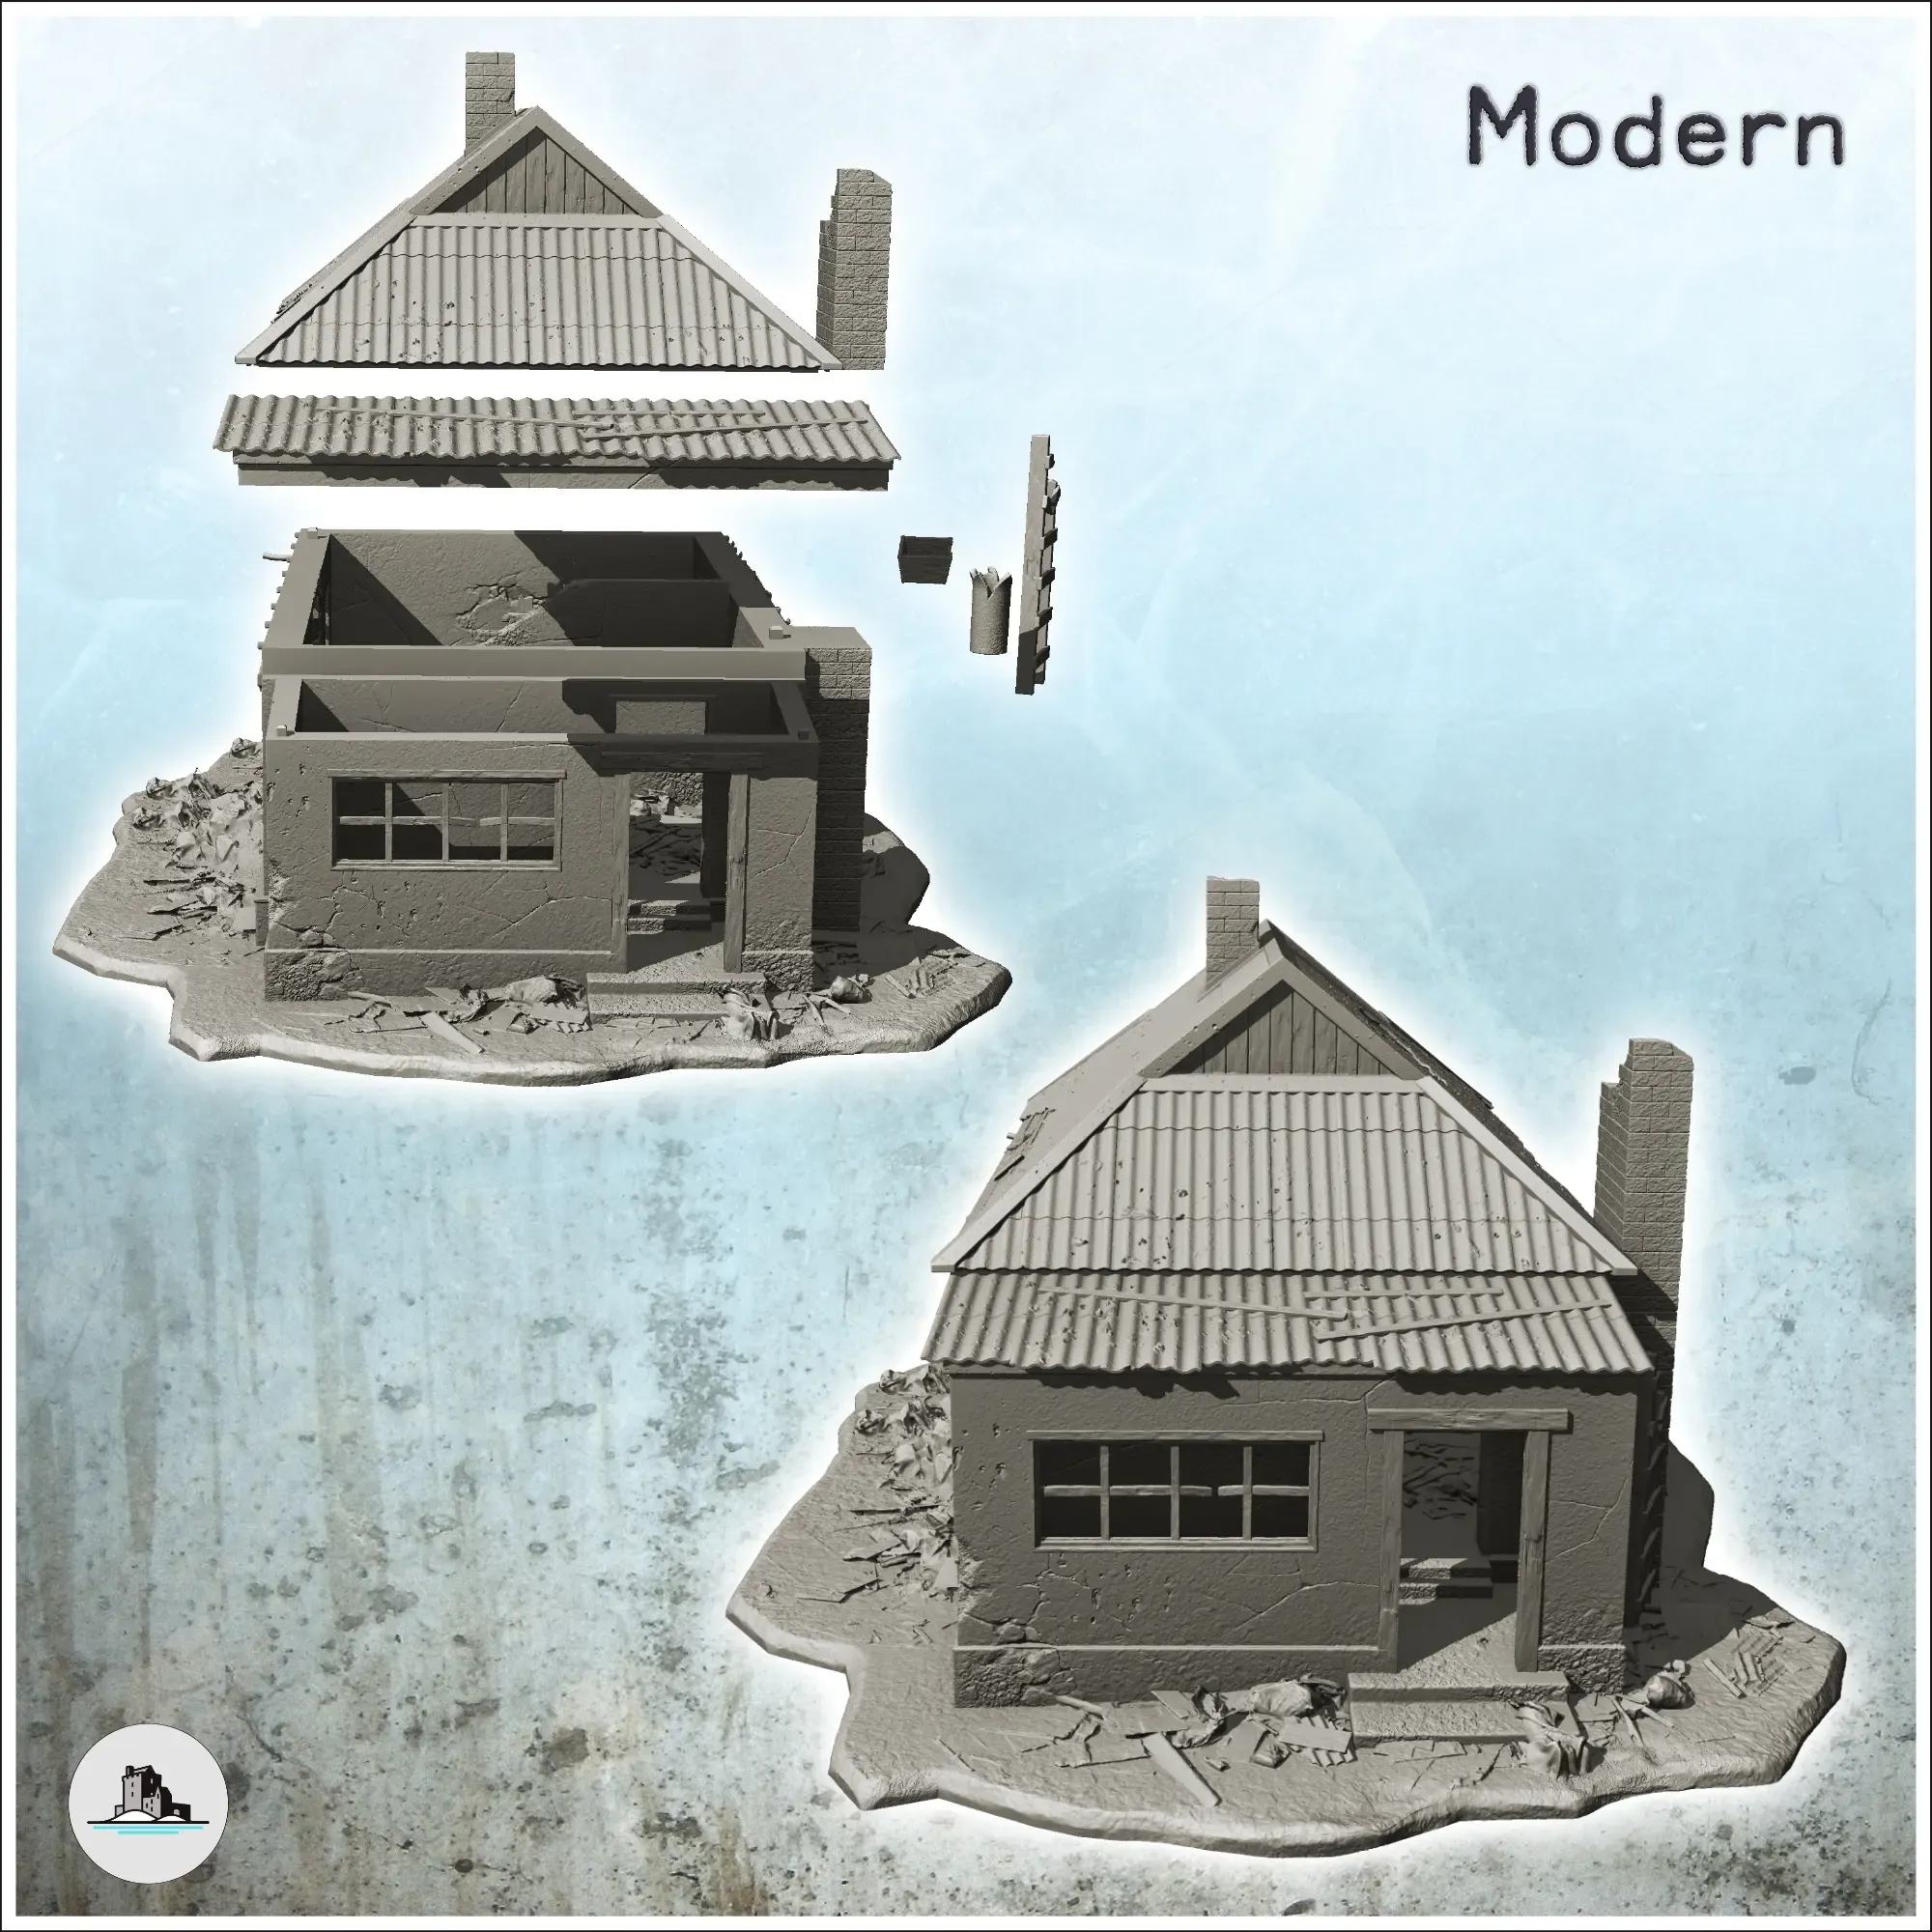 Modern house with tin roof and external chimney (damaged)